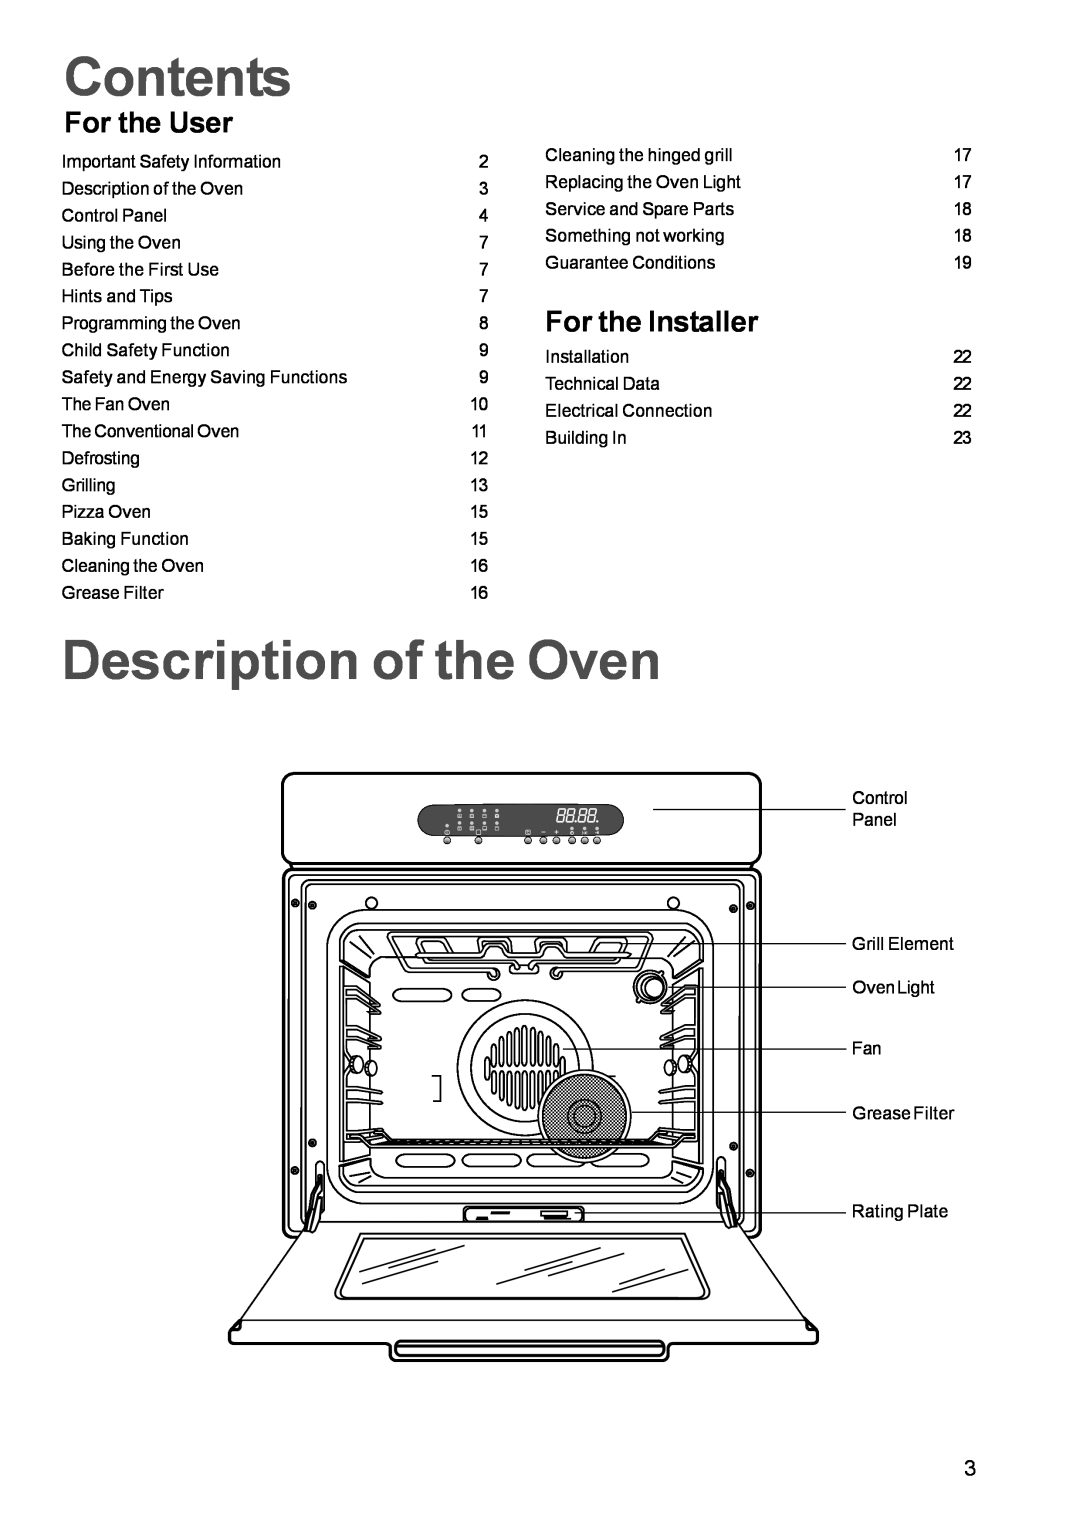 Zanussi ZBM 972 manual Contents, Description of the Oven, For the User, For the Installer 